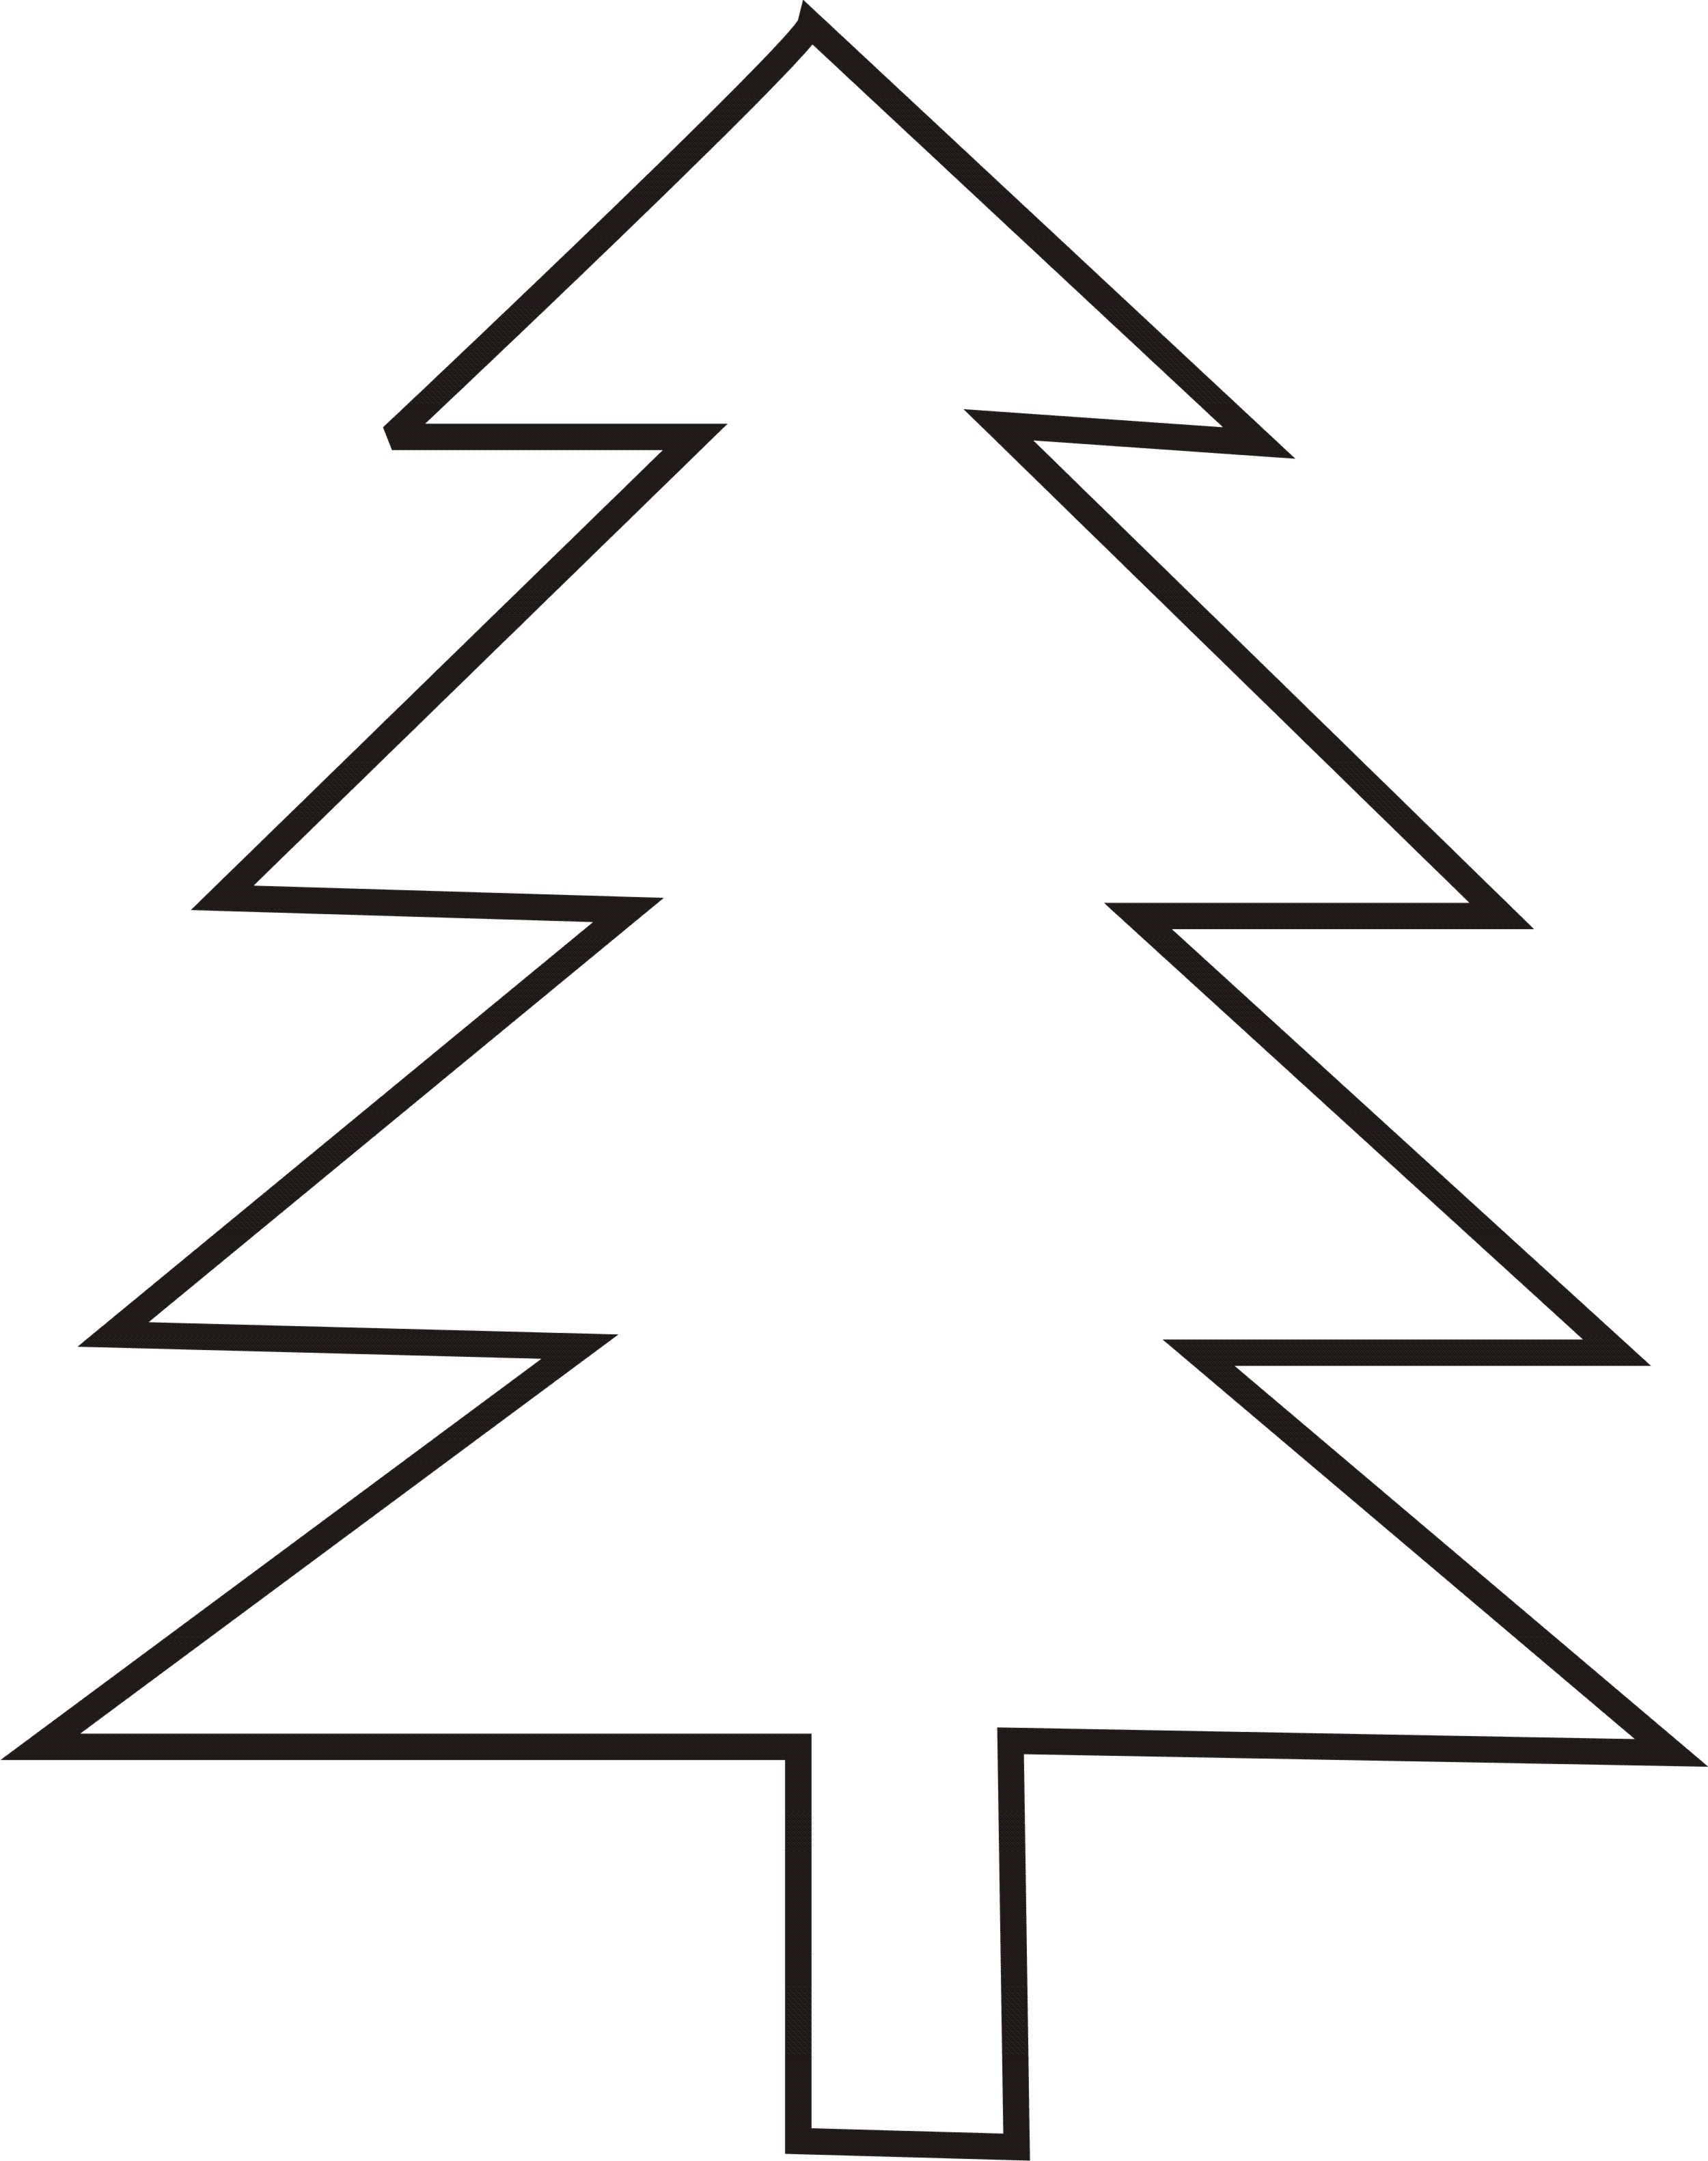 Evergreen Tree Outline - Cliparts.co